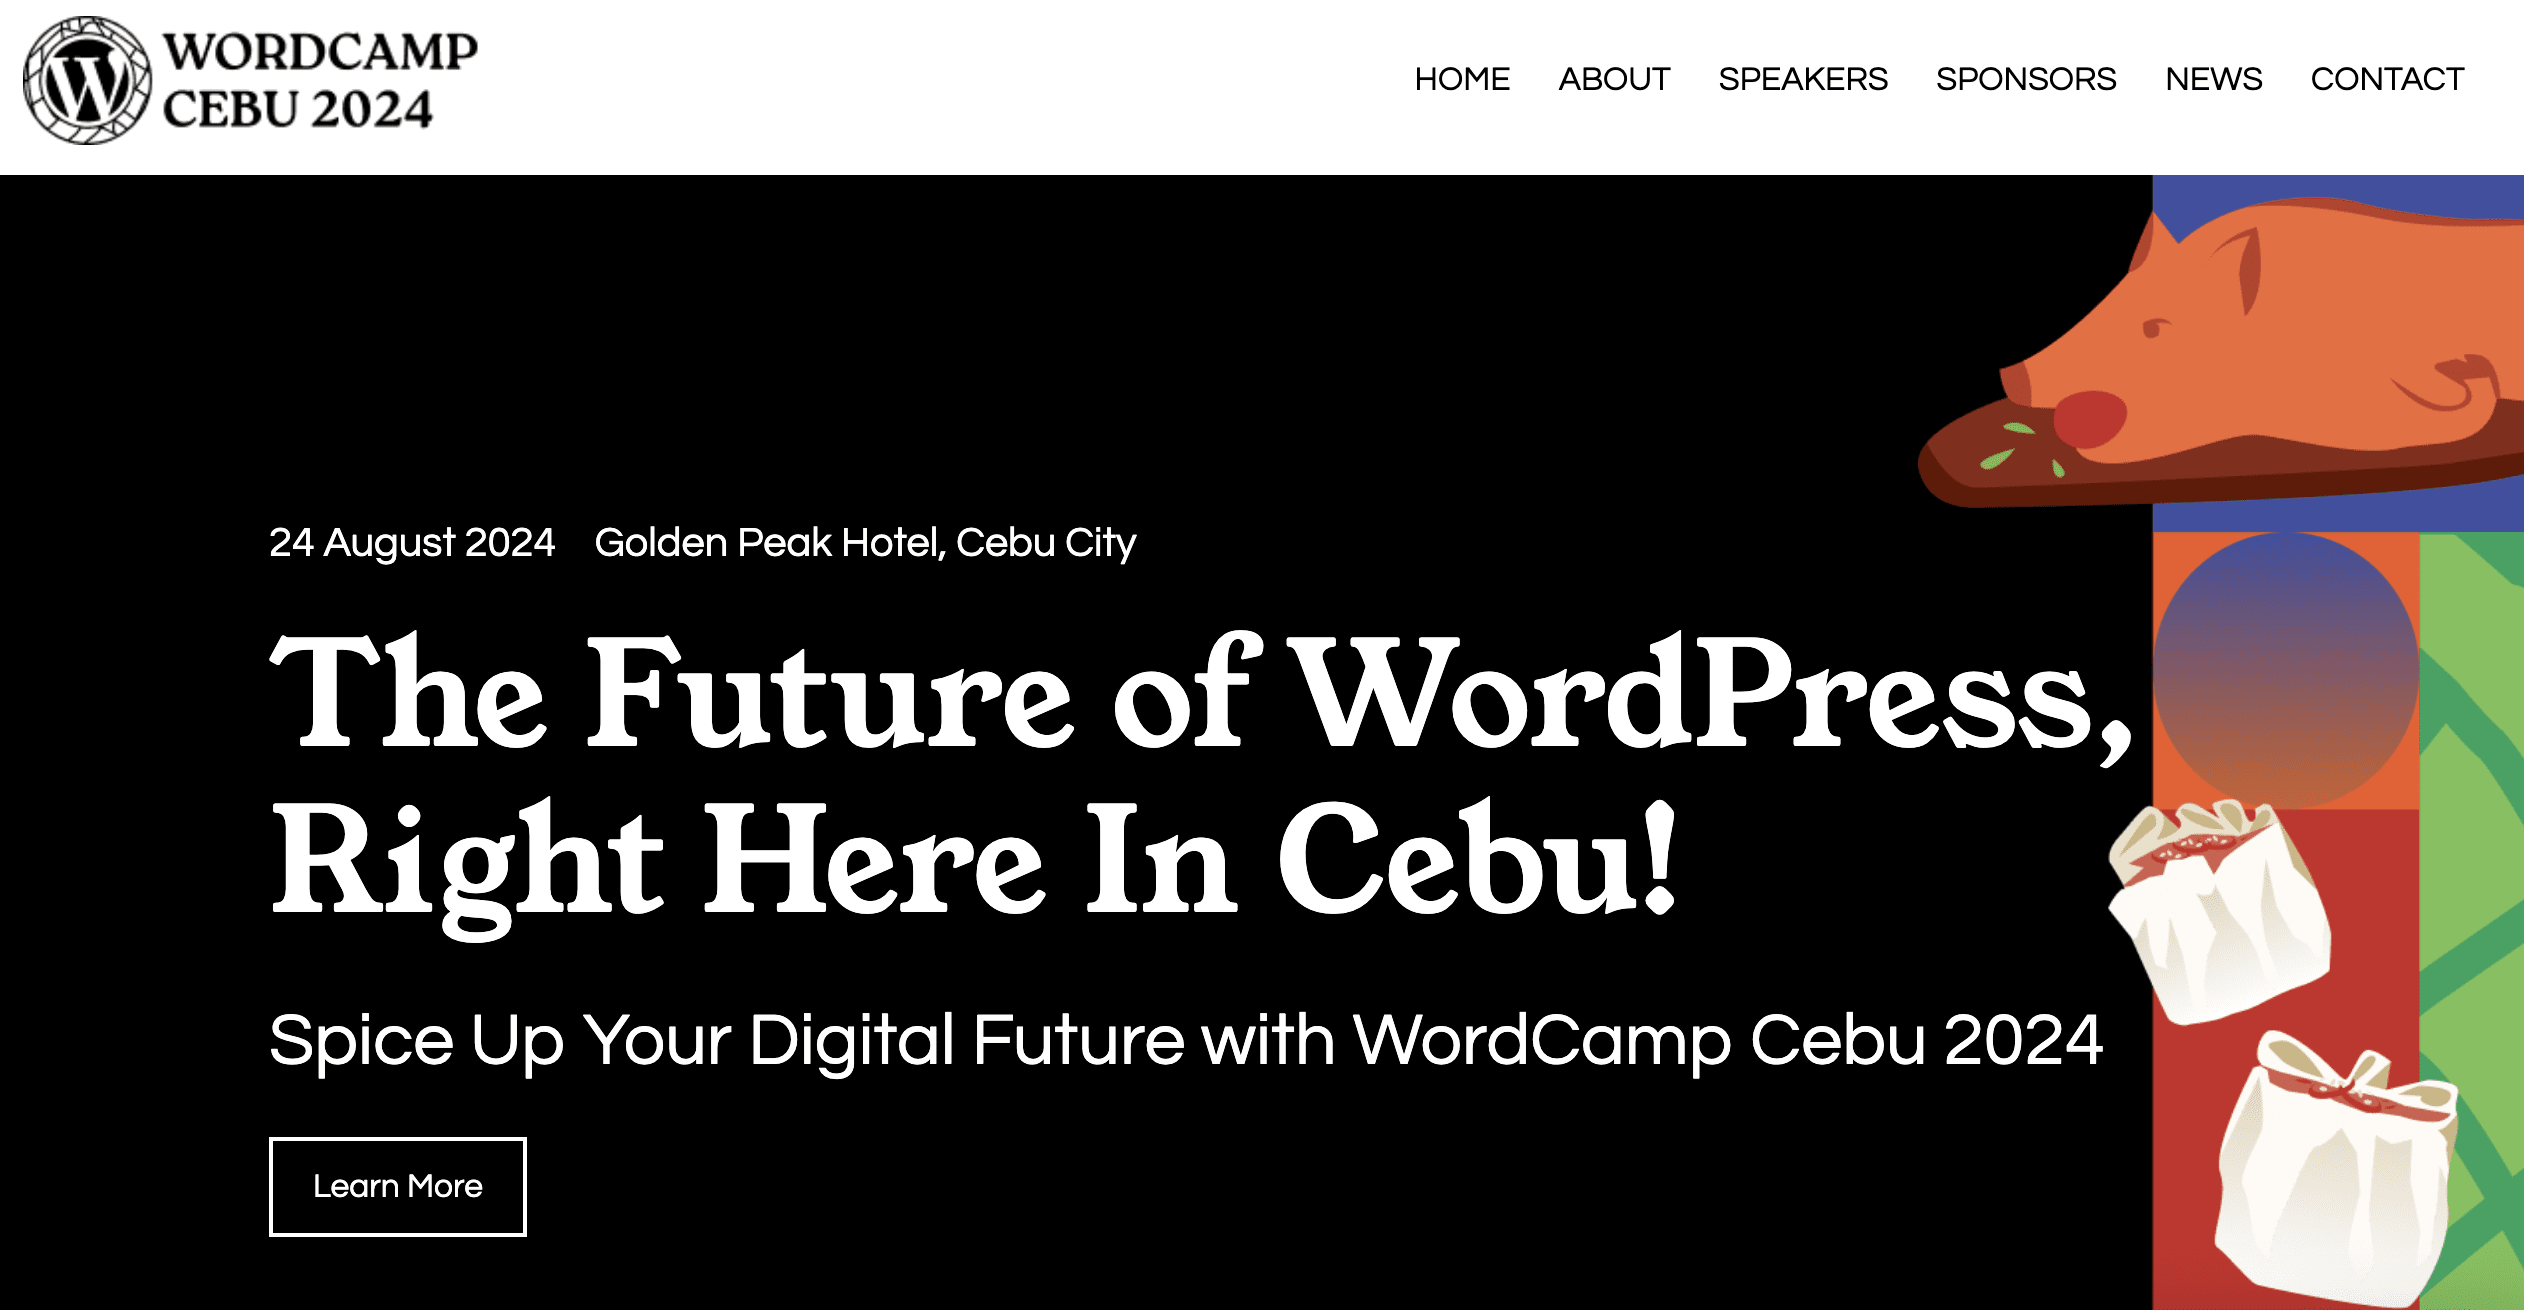 Upcoming WordCamp to attend